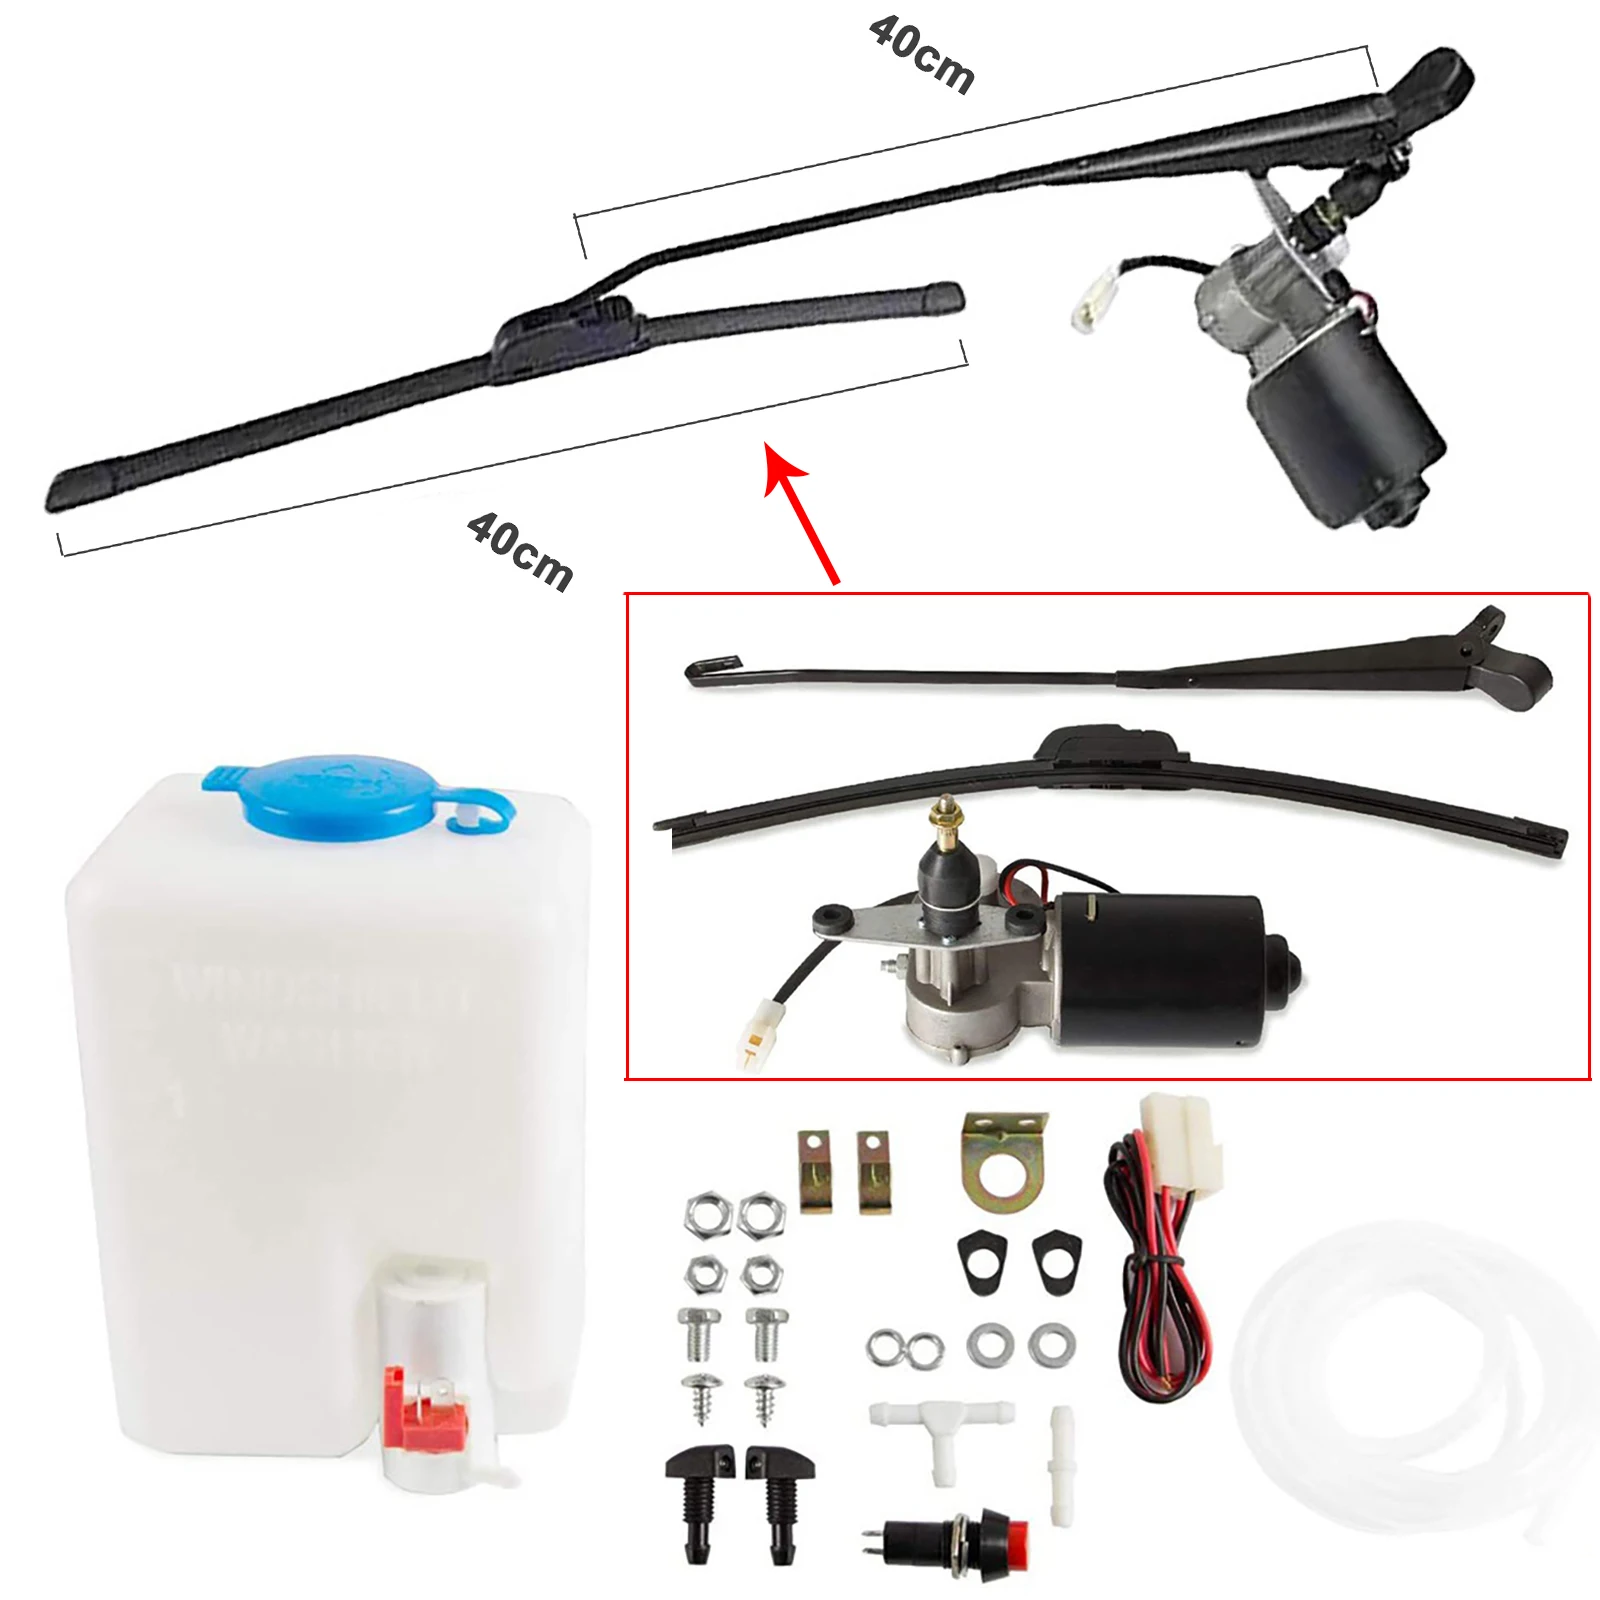 

12V Electric Windshield Wiper Motor Kit with Washer Pump Bottle For Polaris Ranger UTV ATV Tracktor Tricycle Tractors